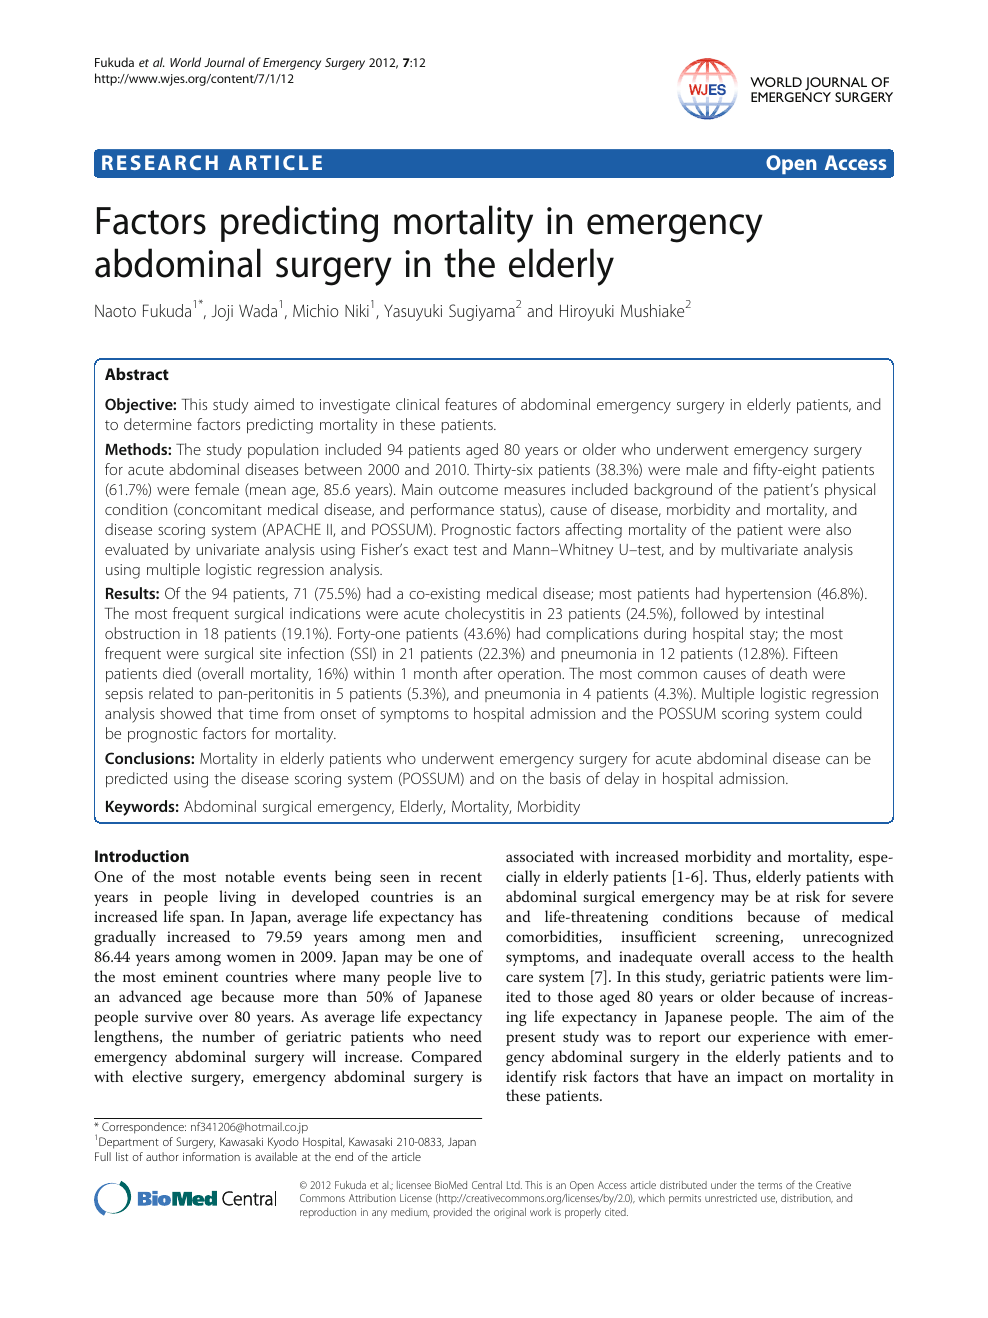 Factors Predicting Mortality In Emergency Abdominal Surgery In The Elderly Topic Of Research Paper In Clinical Medicine Download Scholarly Article Pdf And Read For Free On Cyberleninka Open Science Hub